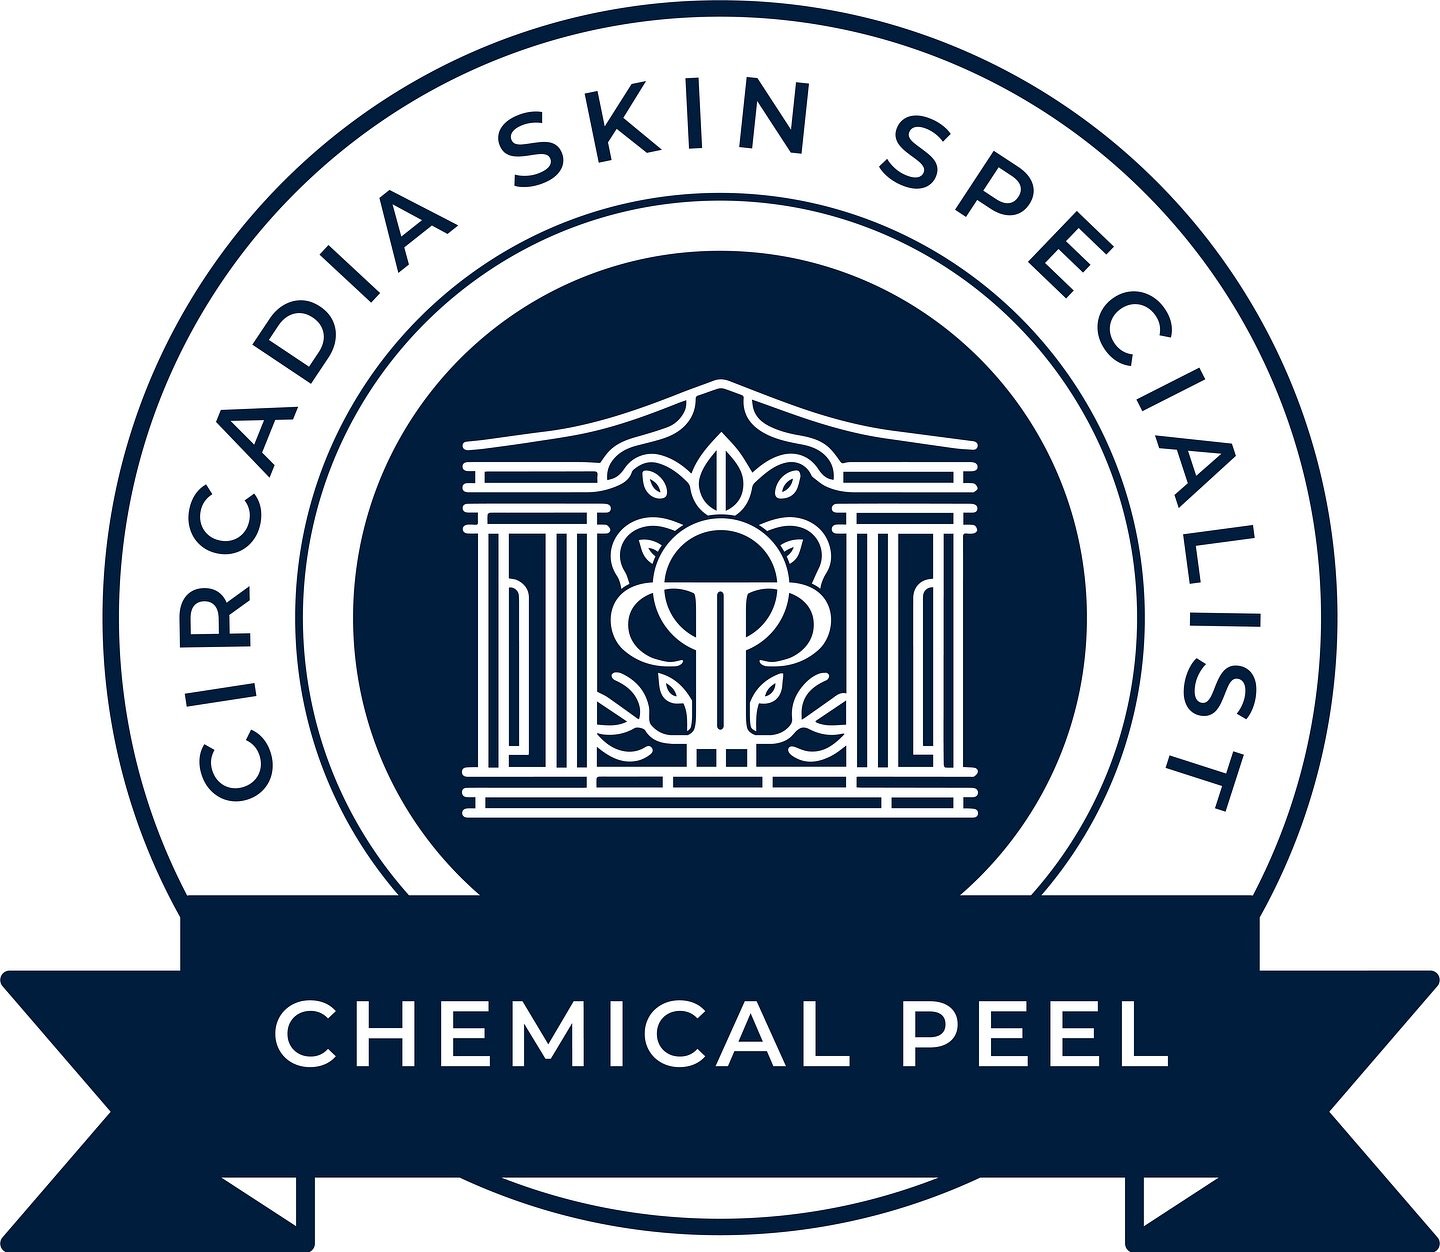 As an experienced esthetician of many years, I am especially excited to offer the Circadia line of peels. I&rsquo;m always updating my training, and love Circadia&rsquo;s science based skincare products and treatments. 
Contact us to book your appoin